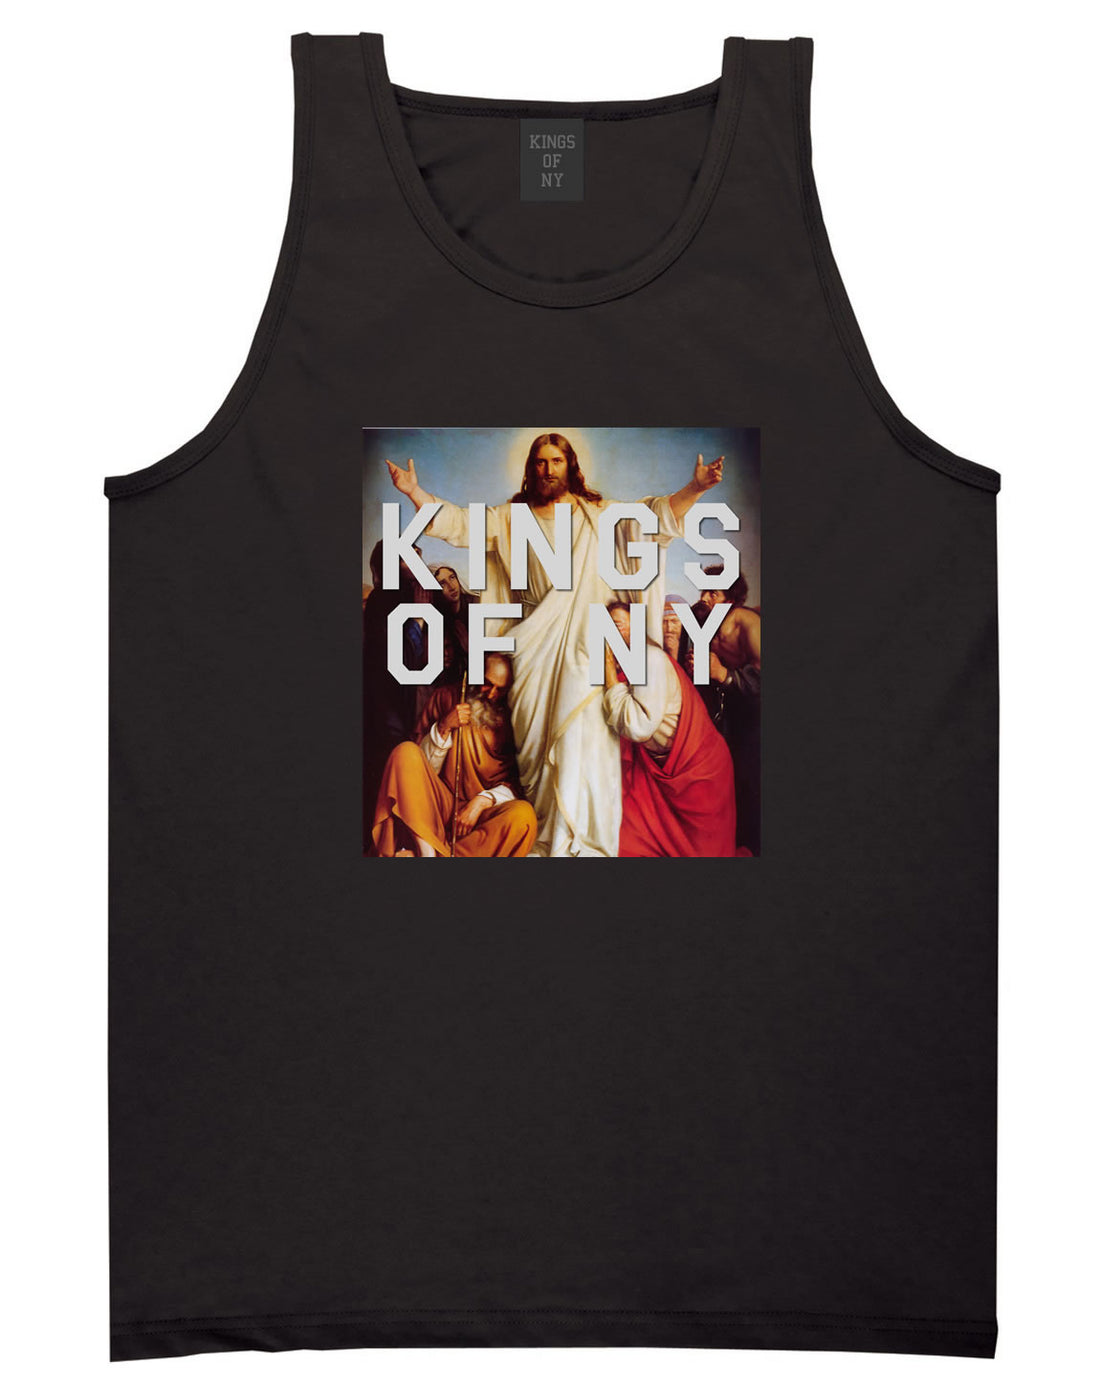 Jesus Worship and Praise of Power Tank Top in Black By Kings Of NY